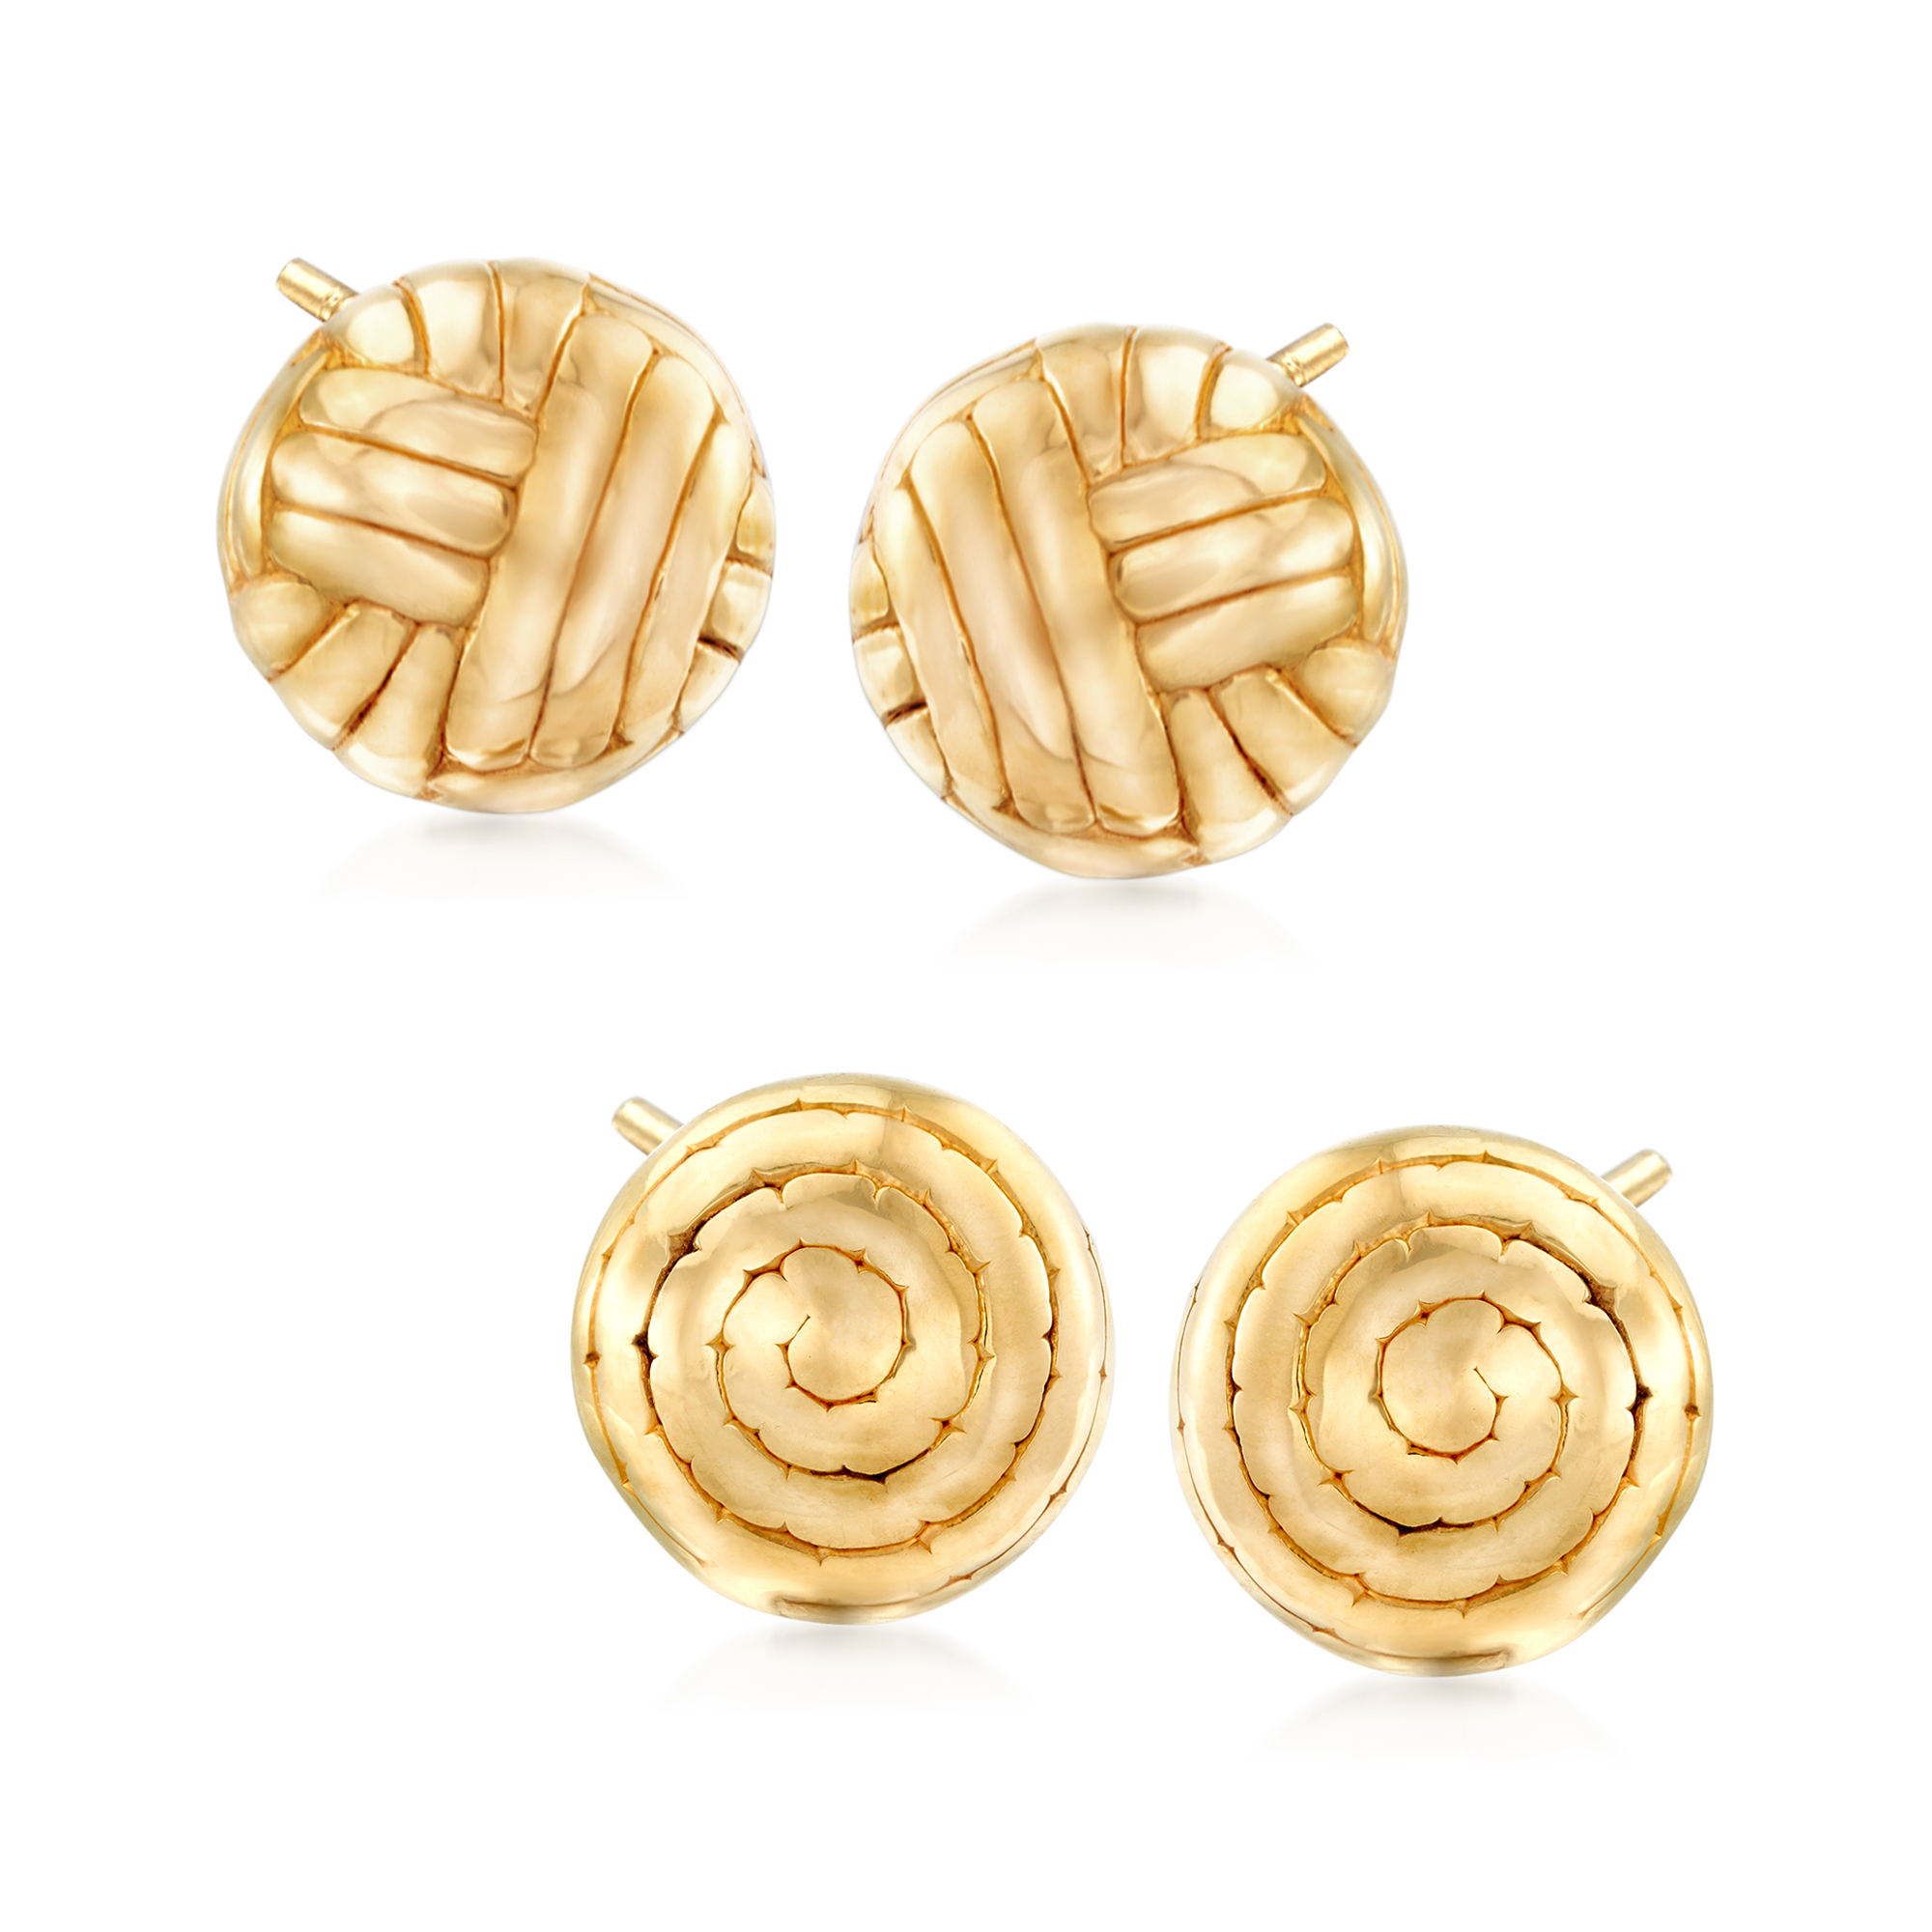 Italian 18kt Gold Over Sterling Jewelry Set: Two Pairs of Puff Swirl 